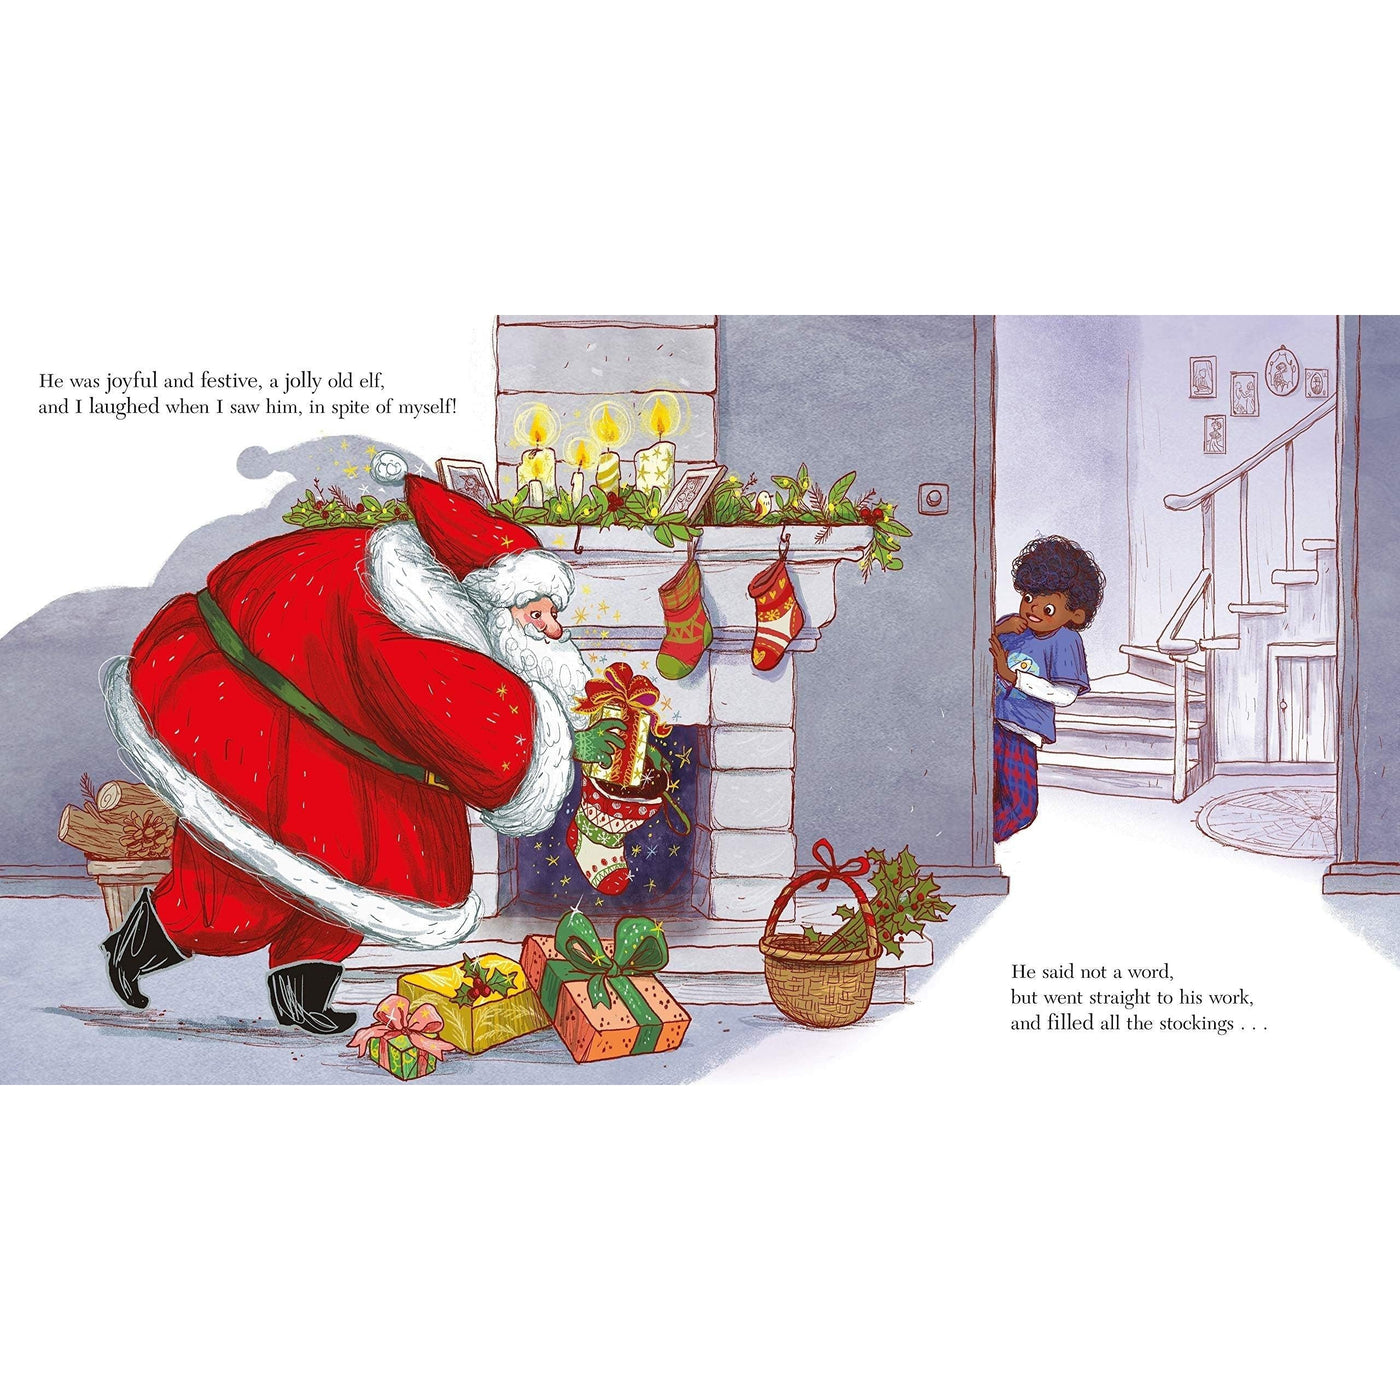 Clement C. Moore's The Night Before Christmas: A Modern Adaptation of the Classic Tale